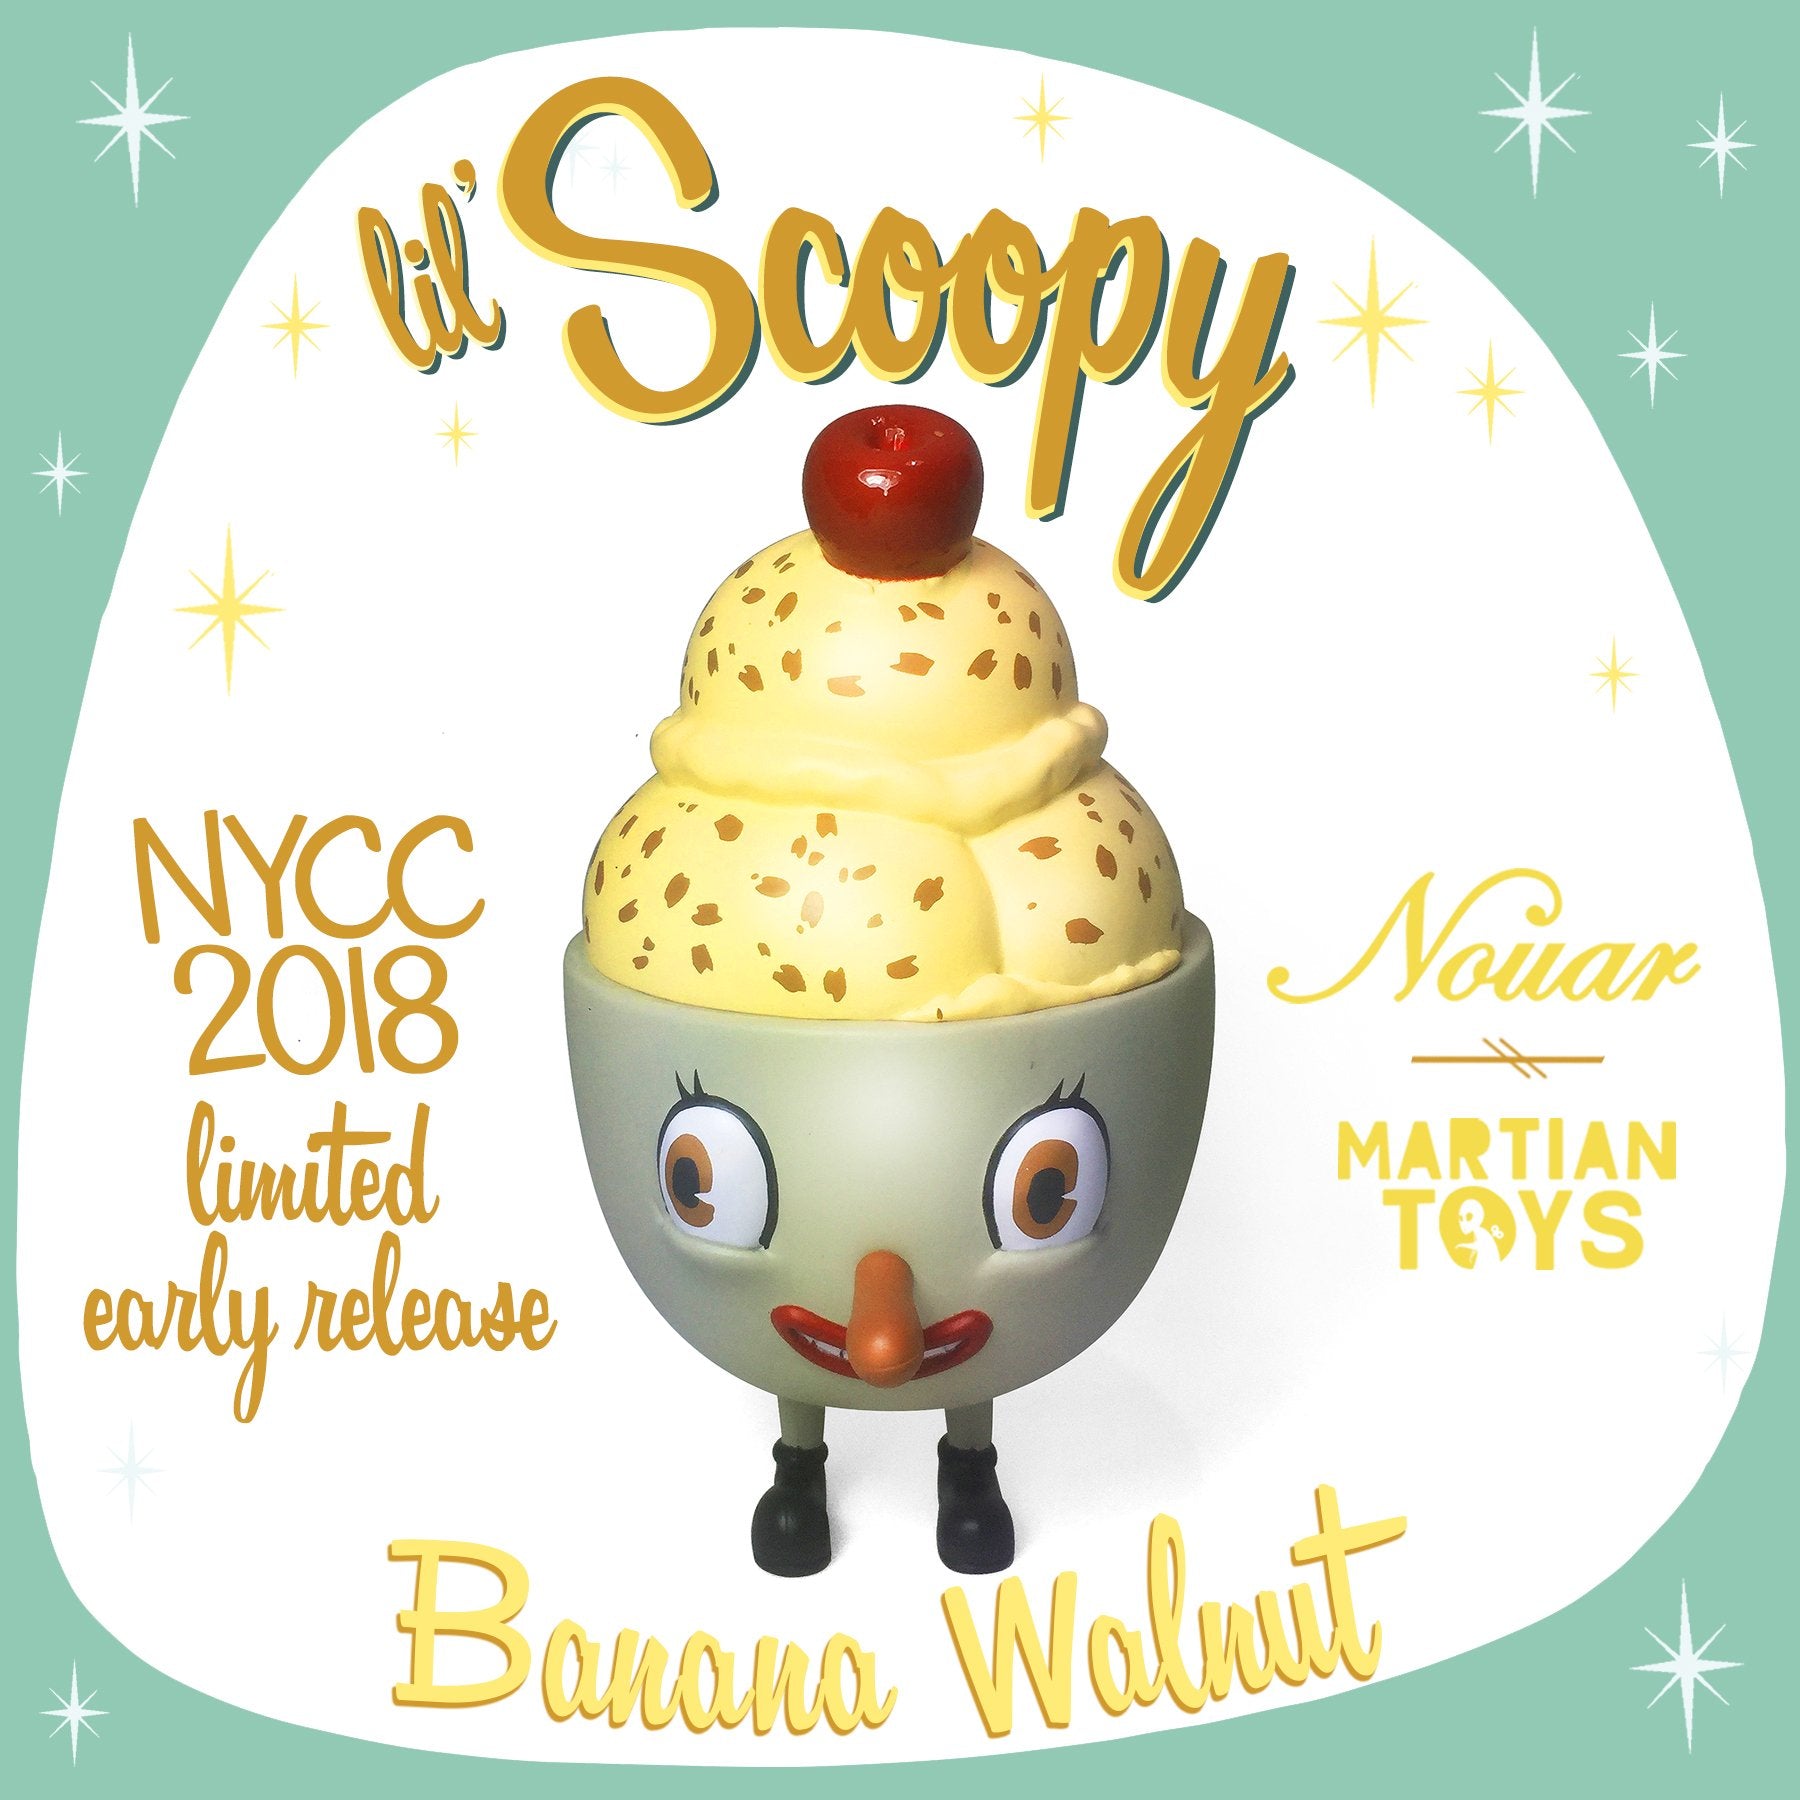 Lil' Scoopy (Assorted Flavors) by Nouar